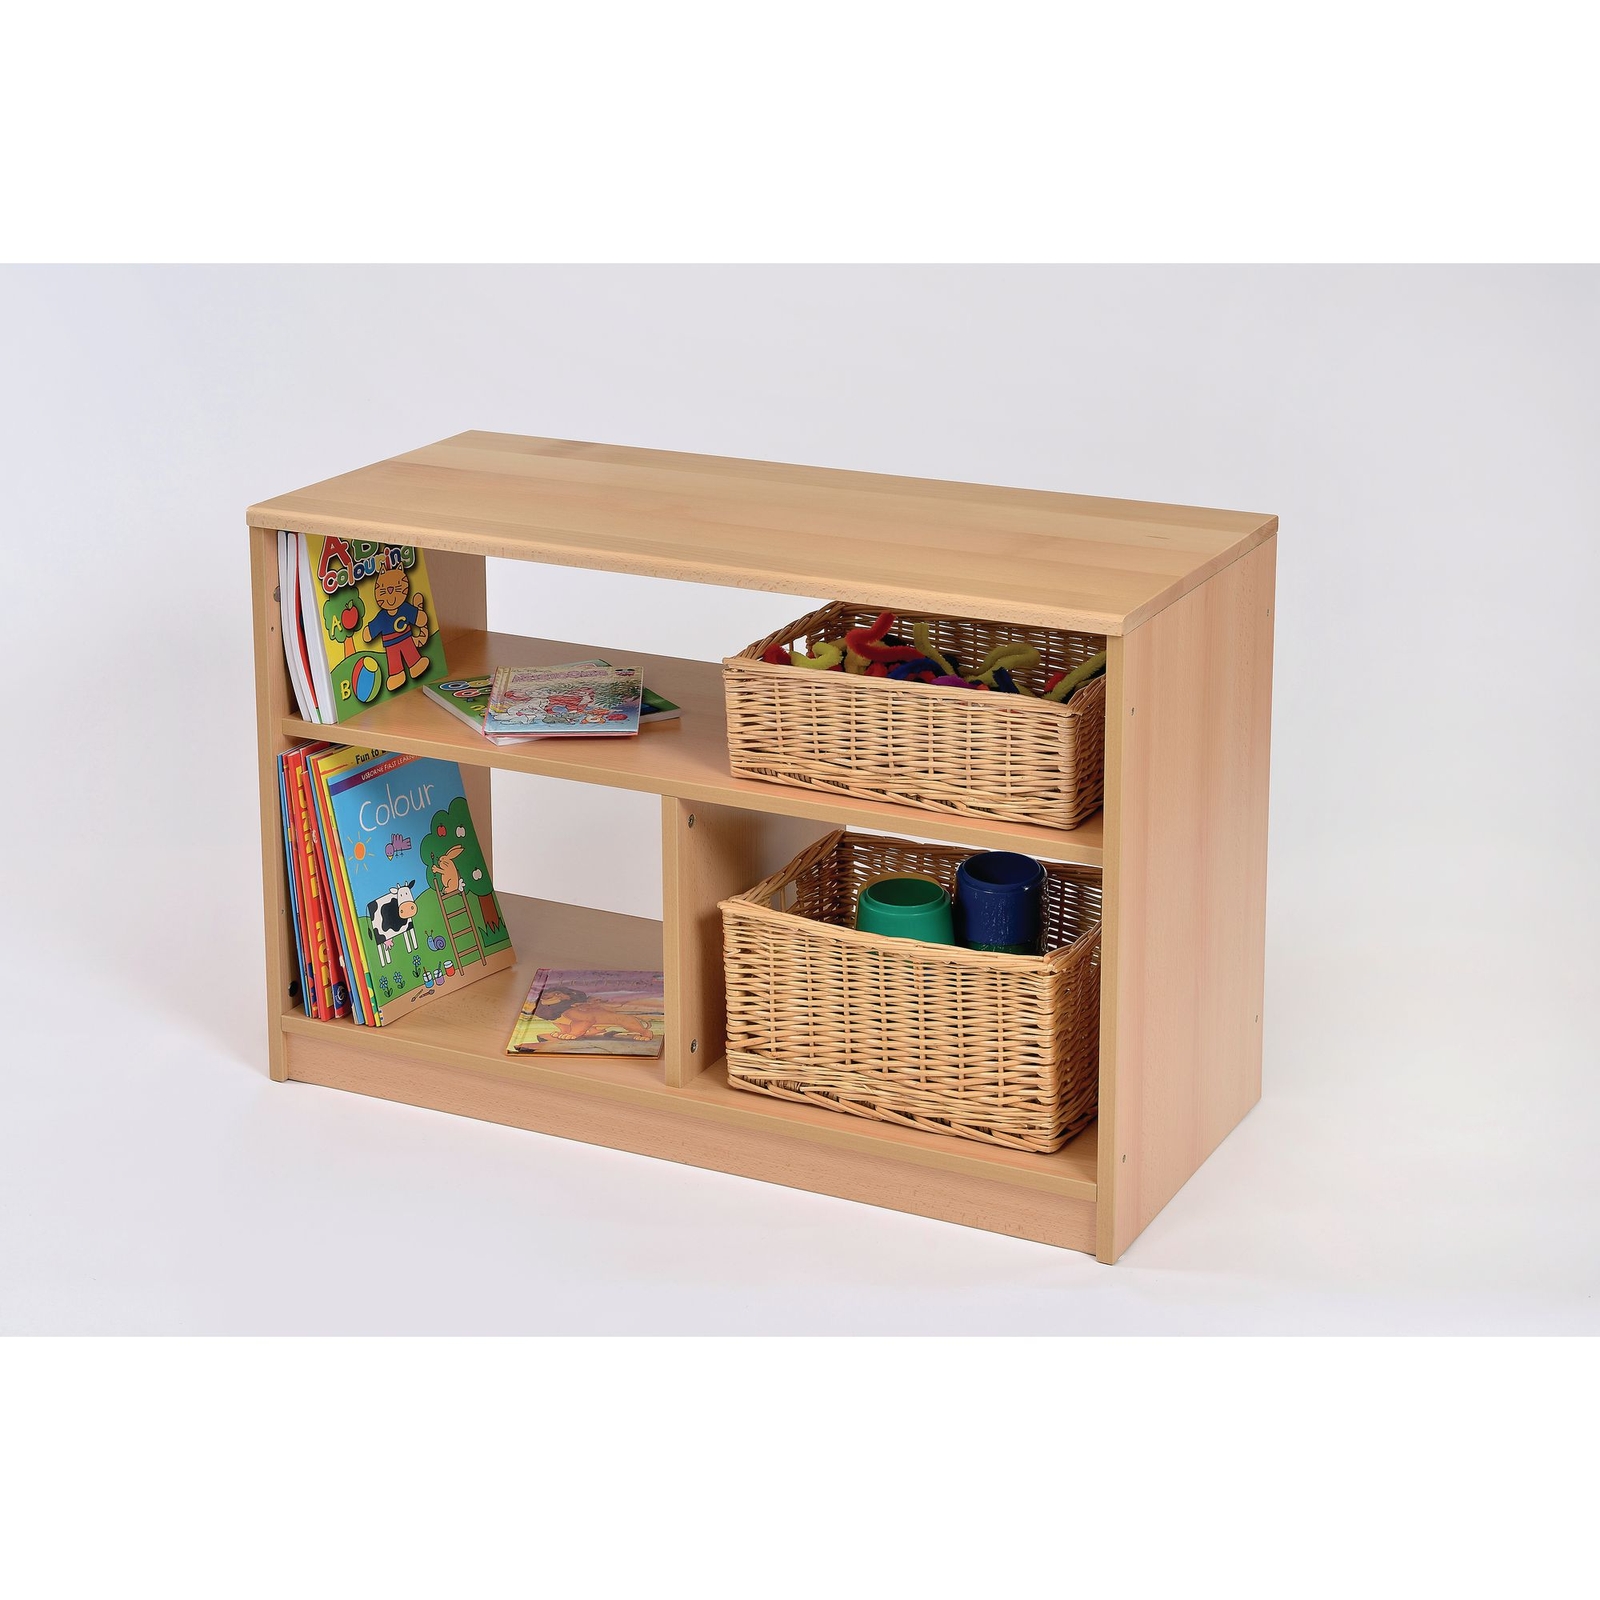 Playscapes Bookcase - Open